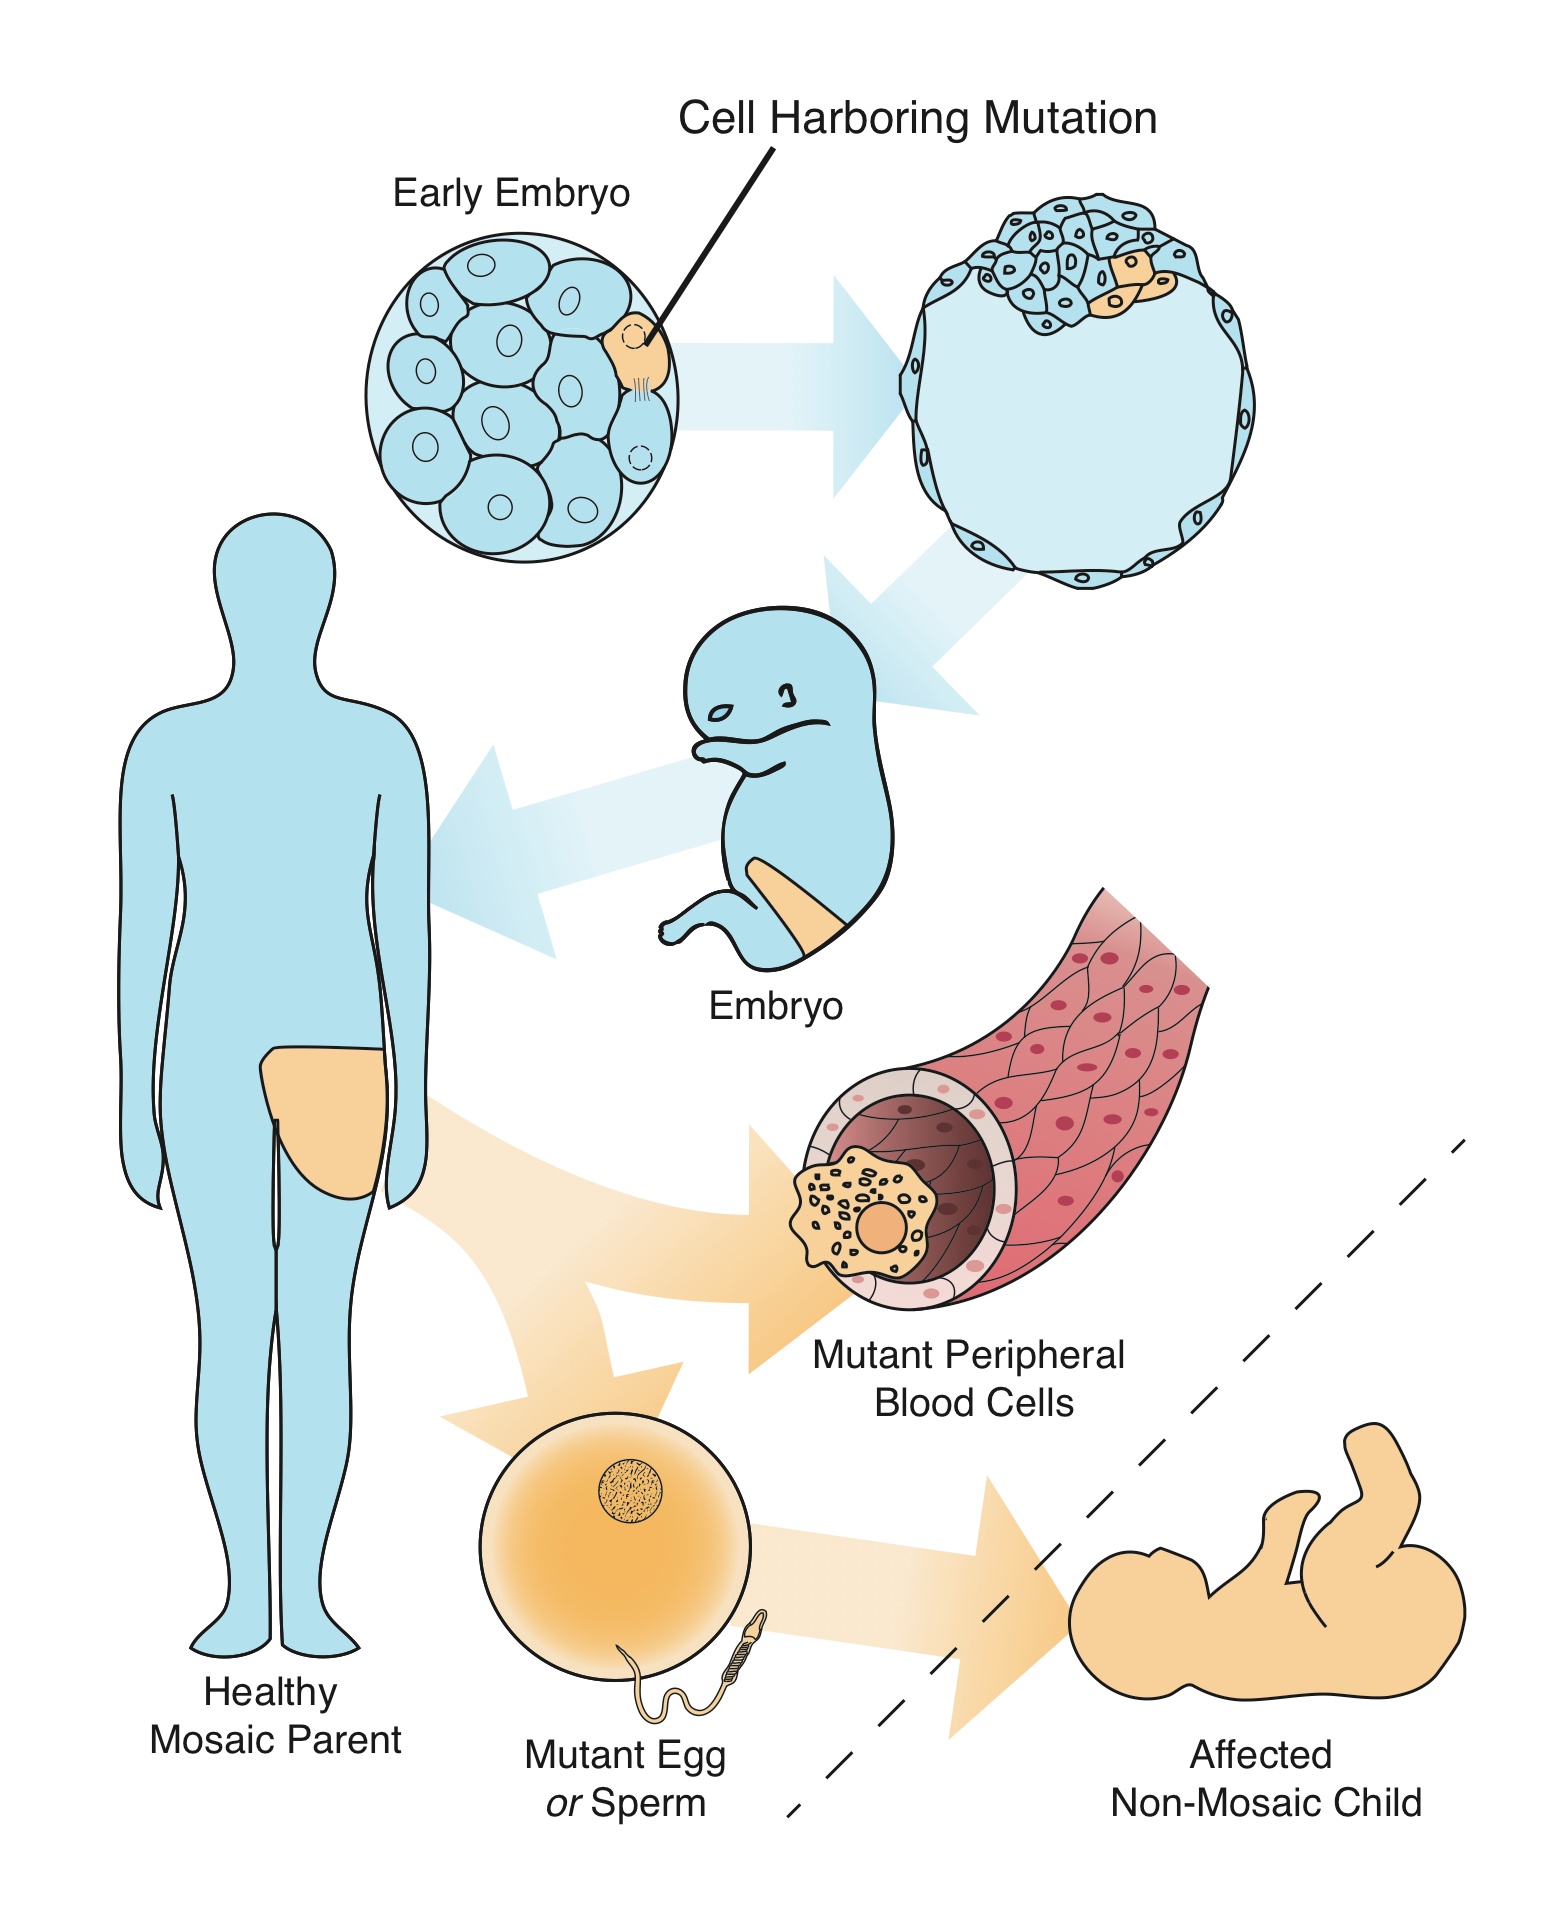 Depending upon when during development a mutation occurs, more or less of the parent's cells can be affected. If mutant cells contribute to the germ line, the mutation can be passed on to one or more children. If the mutant cells also contribute to the blood, the mutation can potentially be detected by genetic tests.